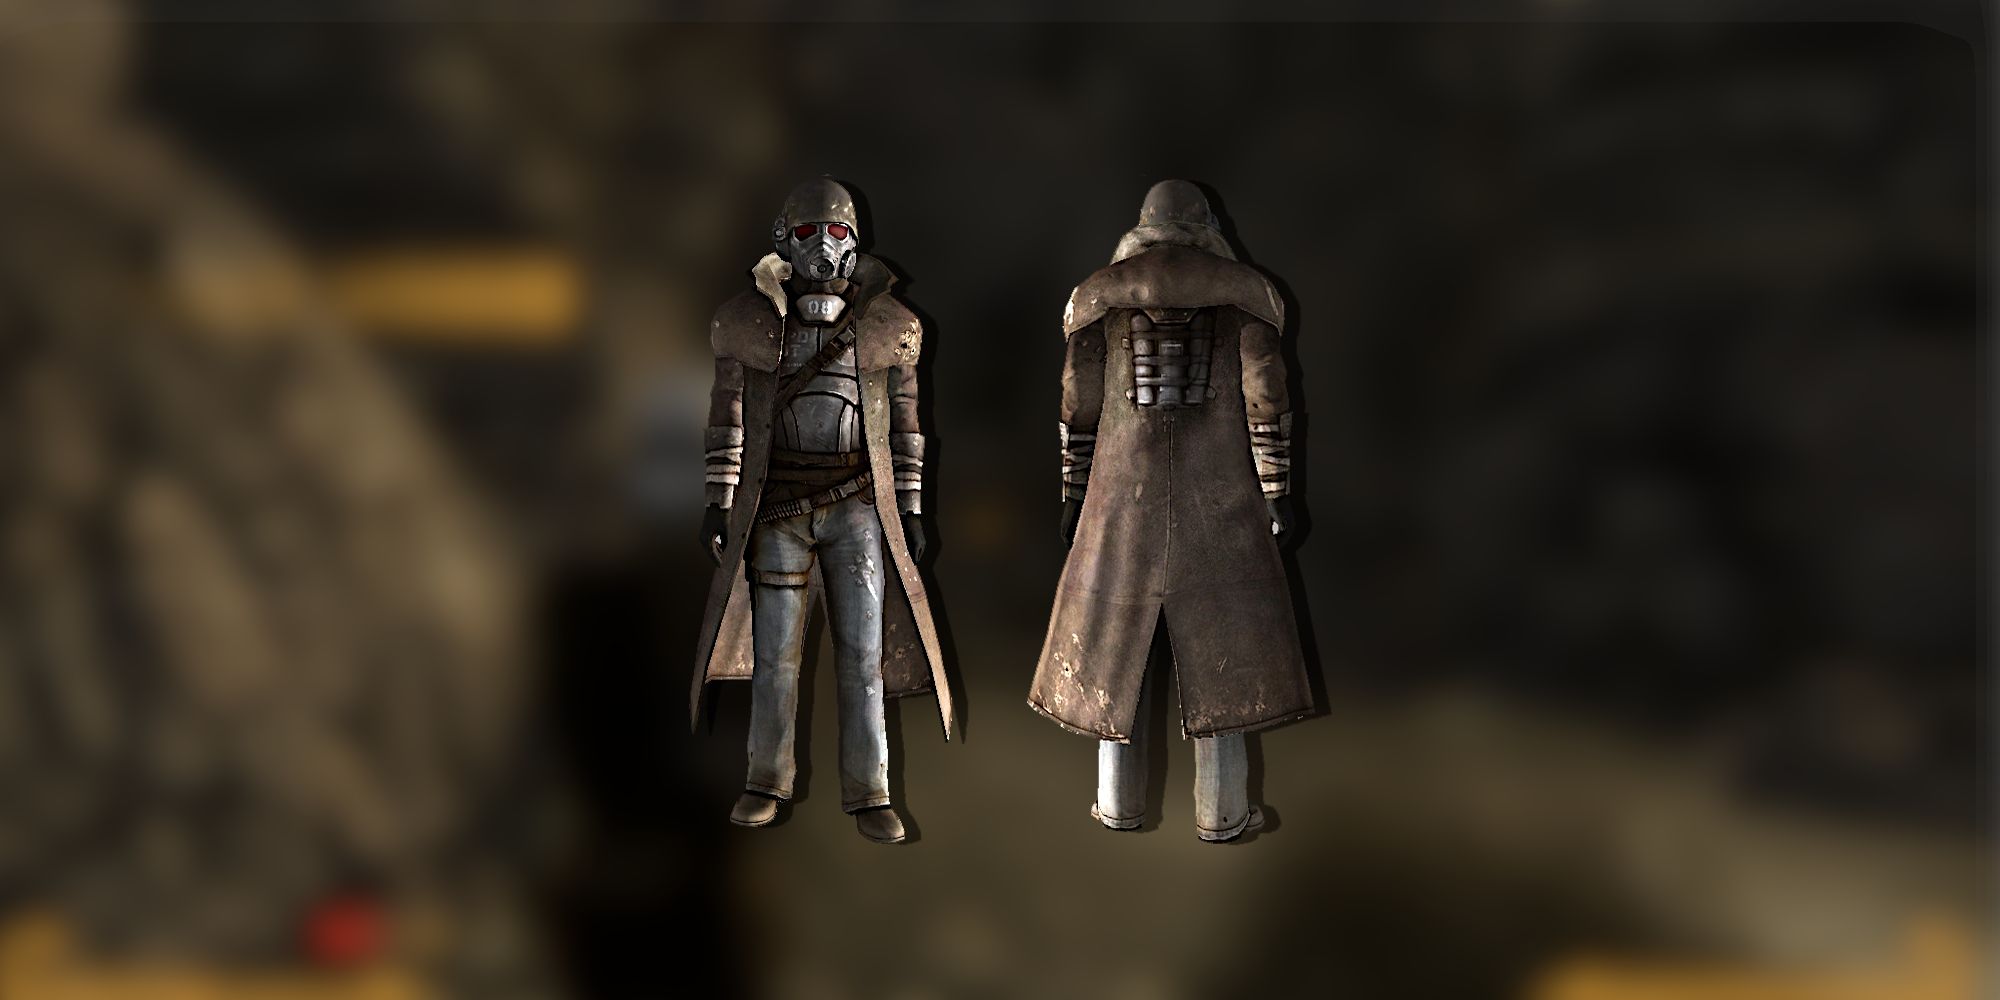 Image of the NCR Ranger Combat Armor in Fallout New Vegas